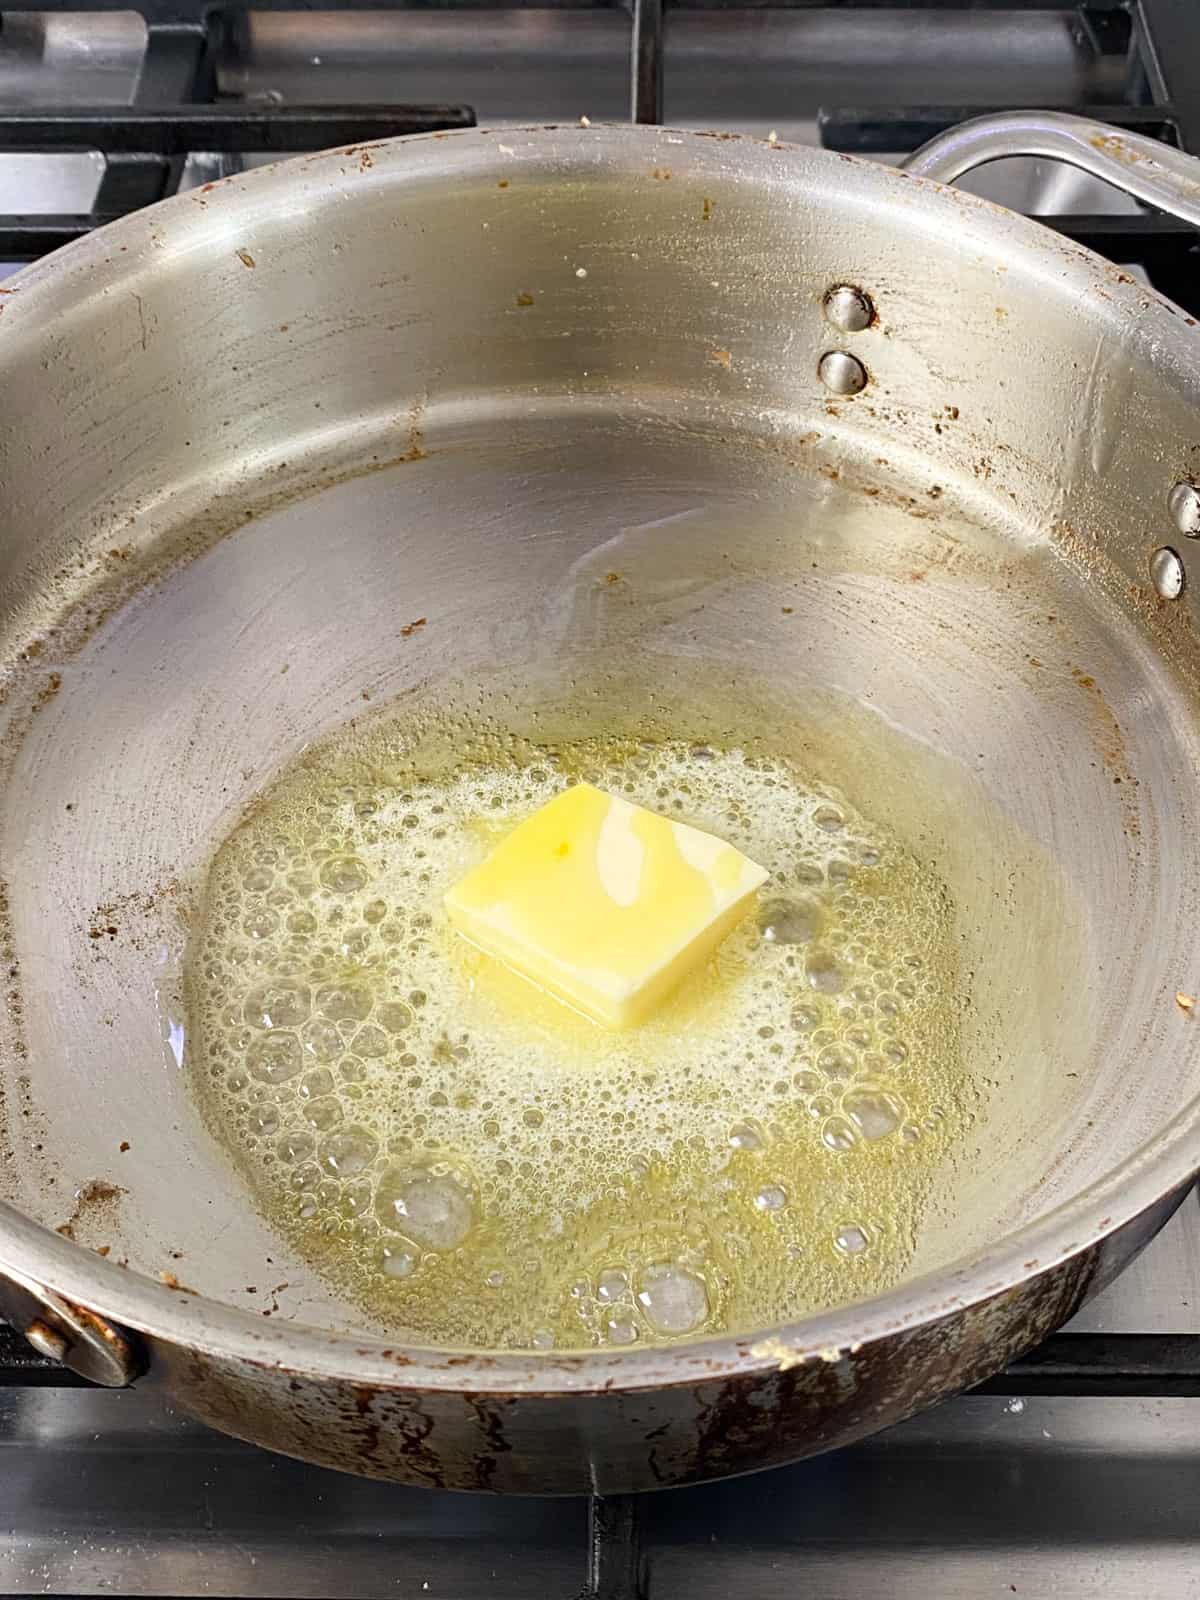 Once the chicken cutlets are cooked and removed, add more butter to the skillet.